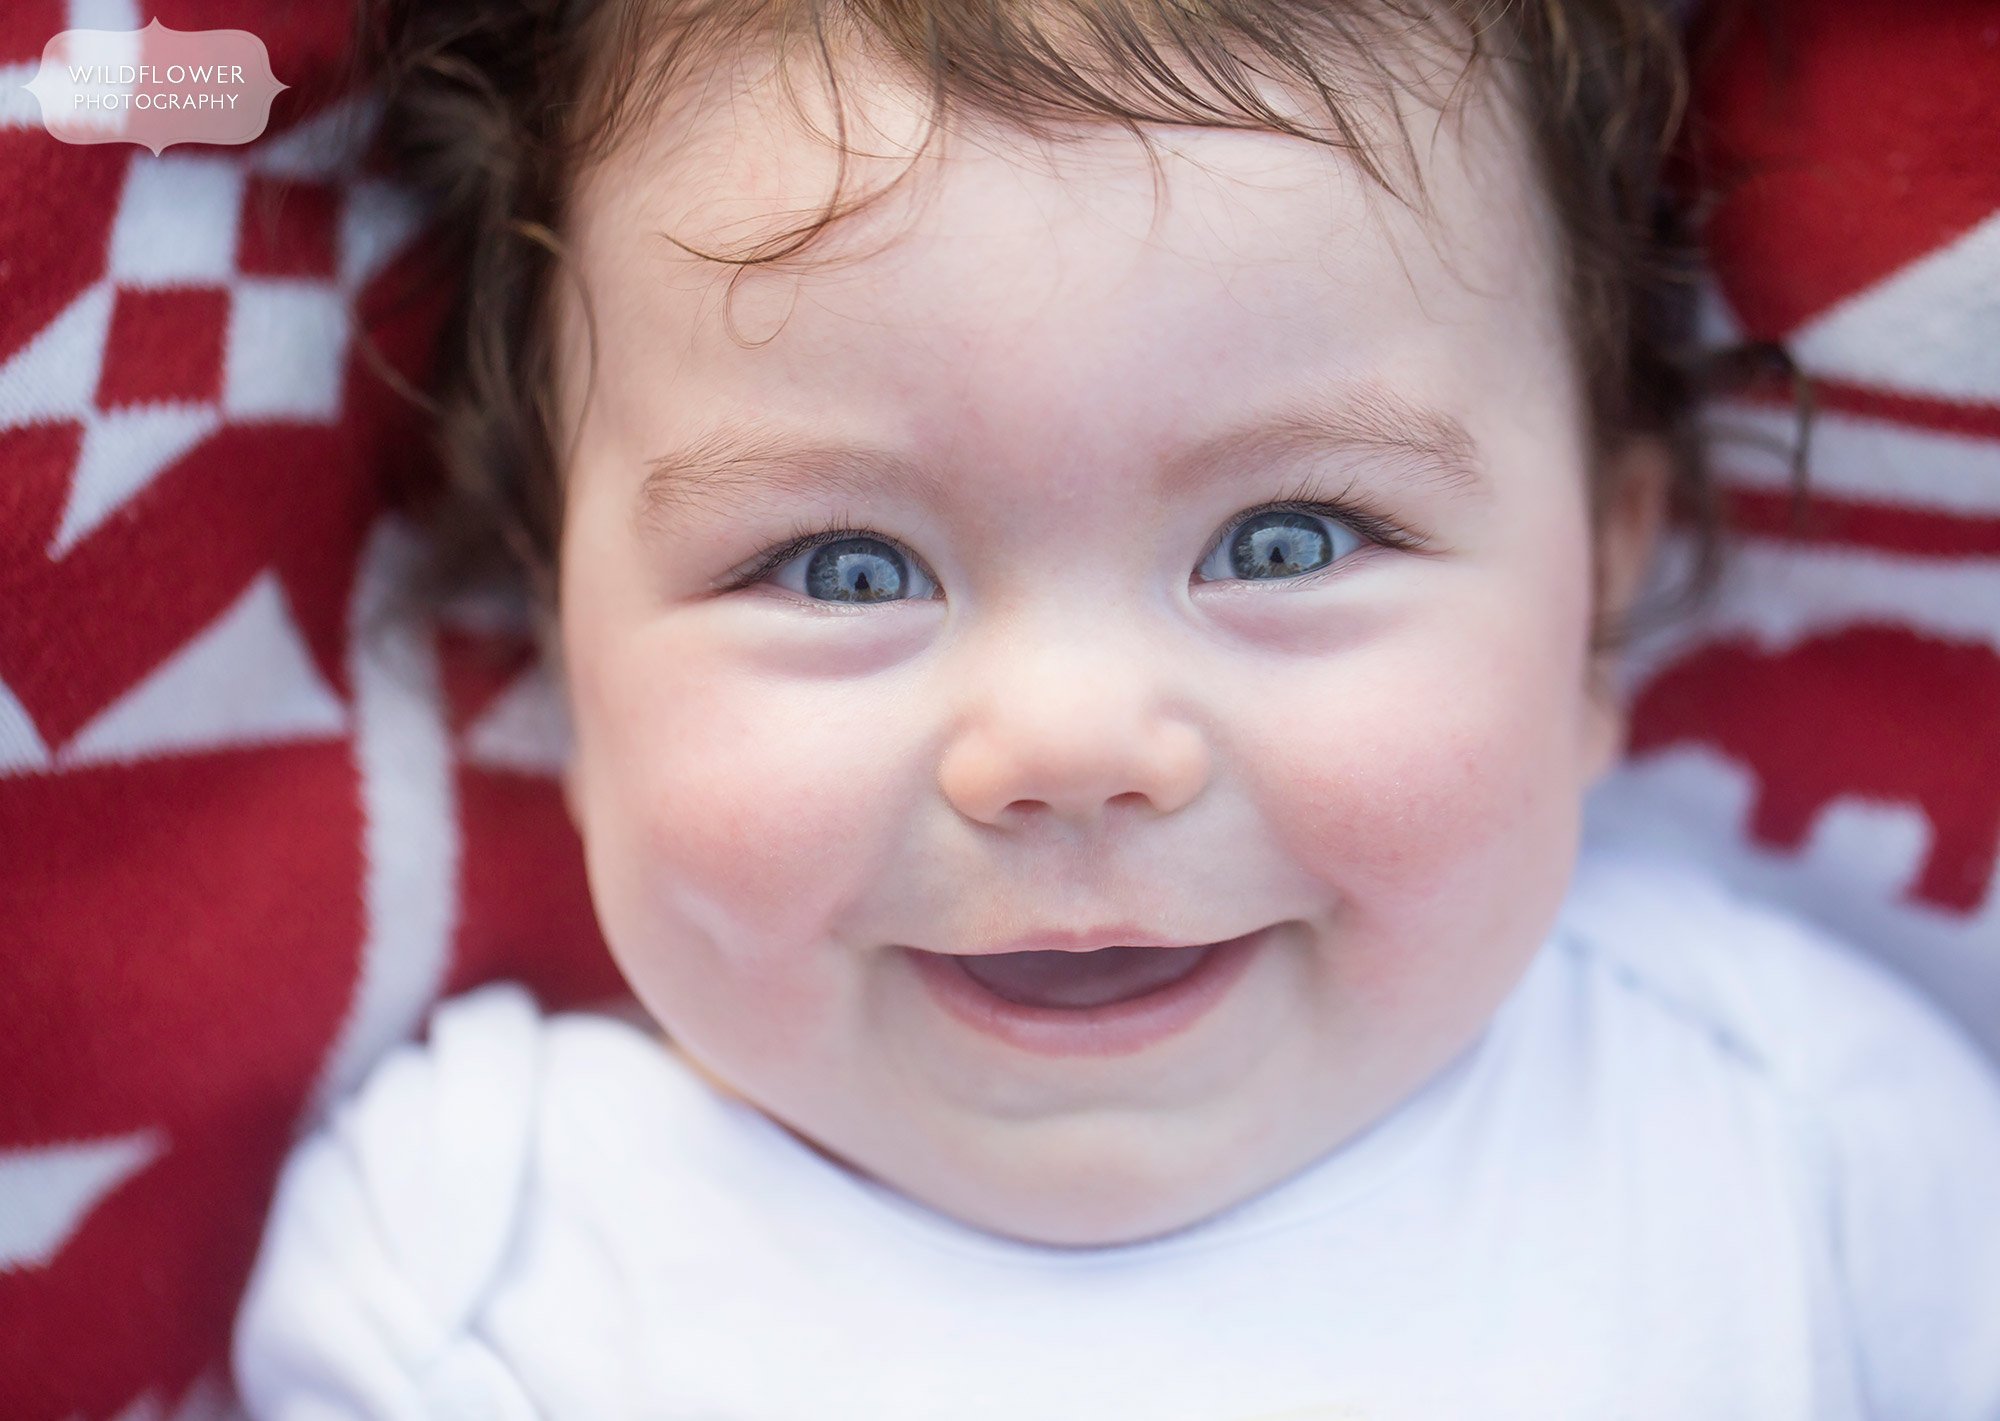 Close up photo of smiling baby in Columbia, MO.